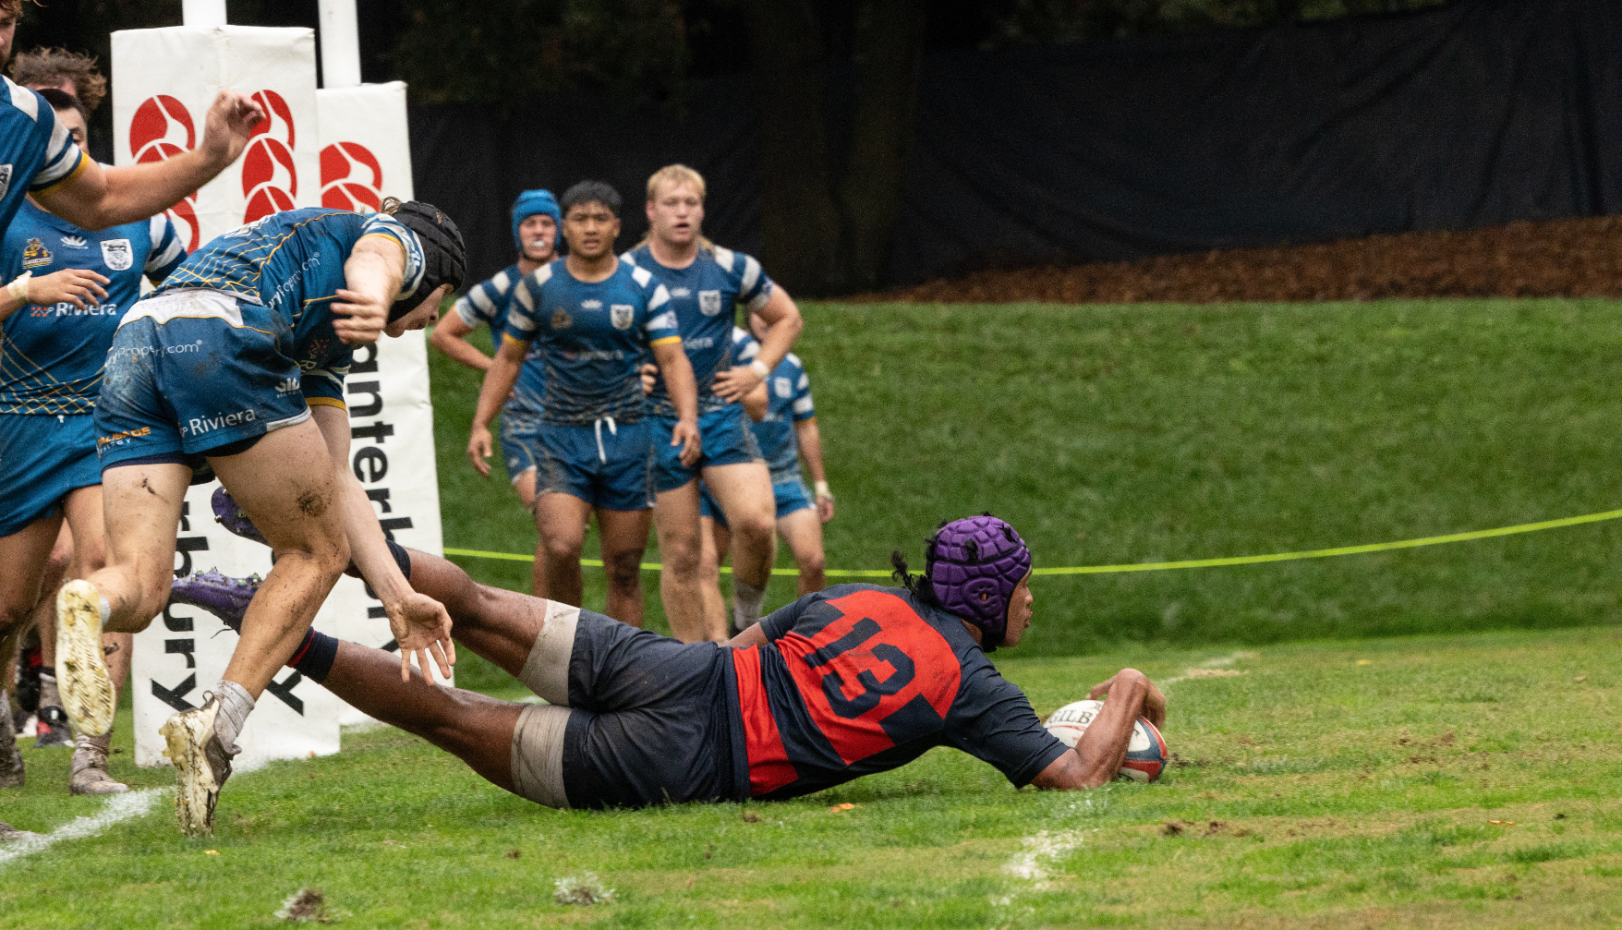 Men's Rugby Player Scores a Try